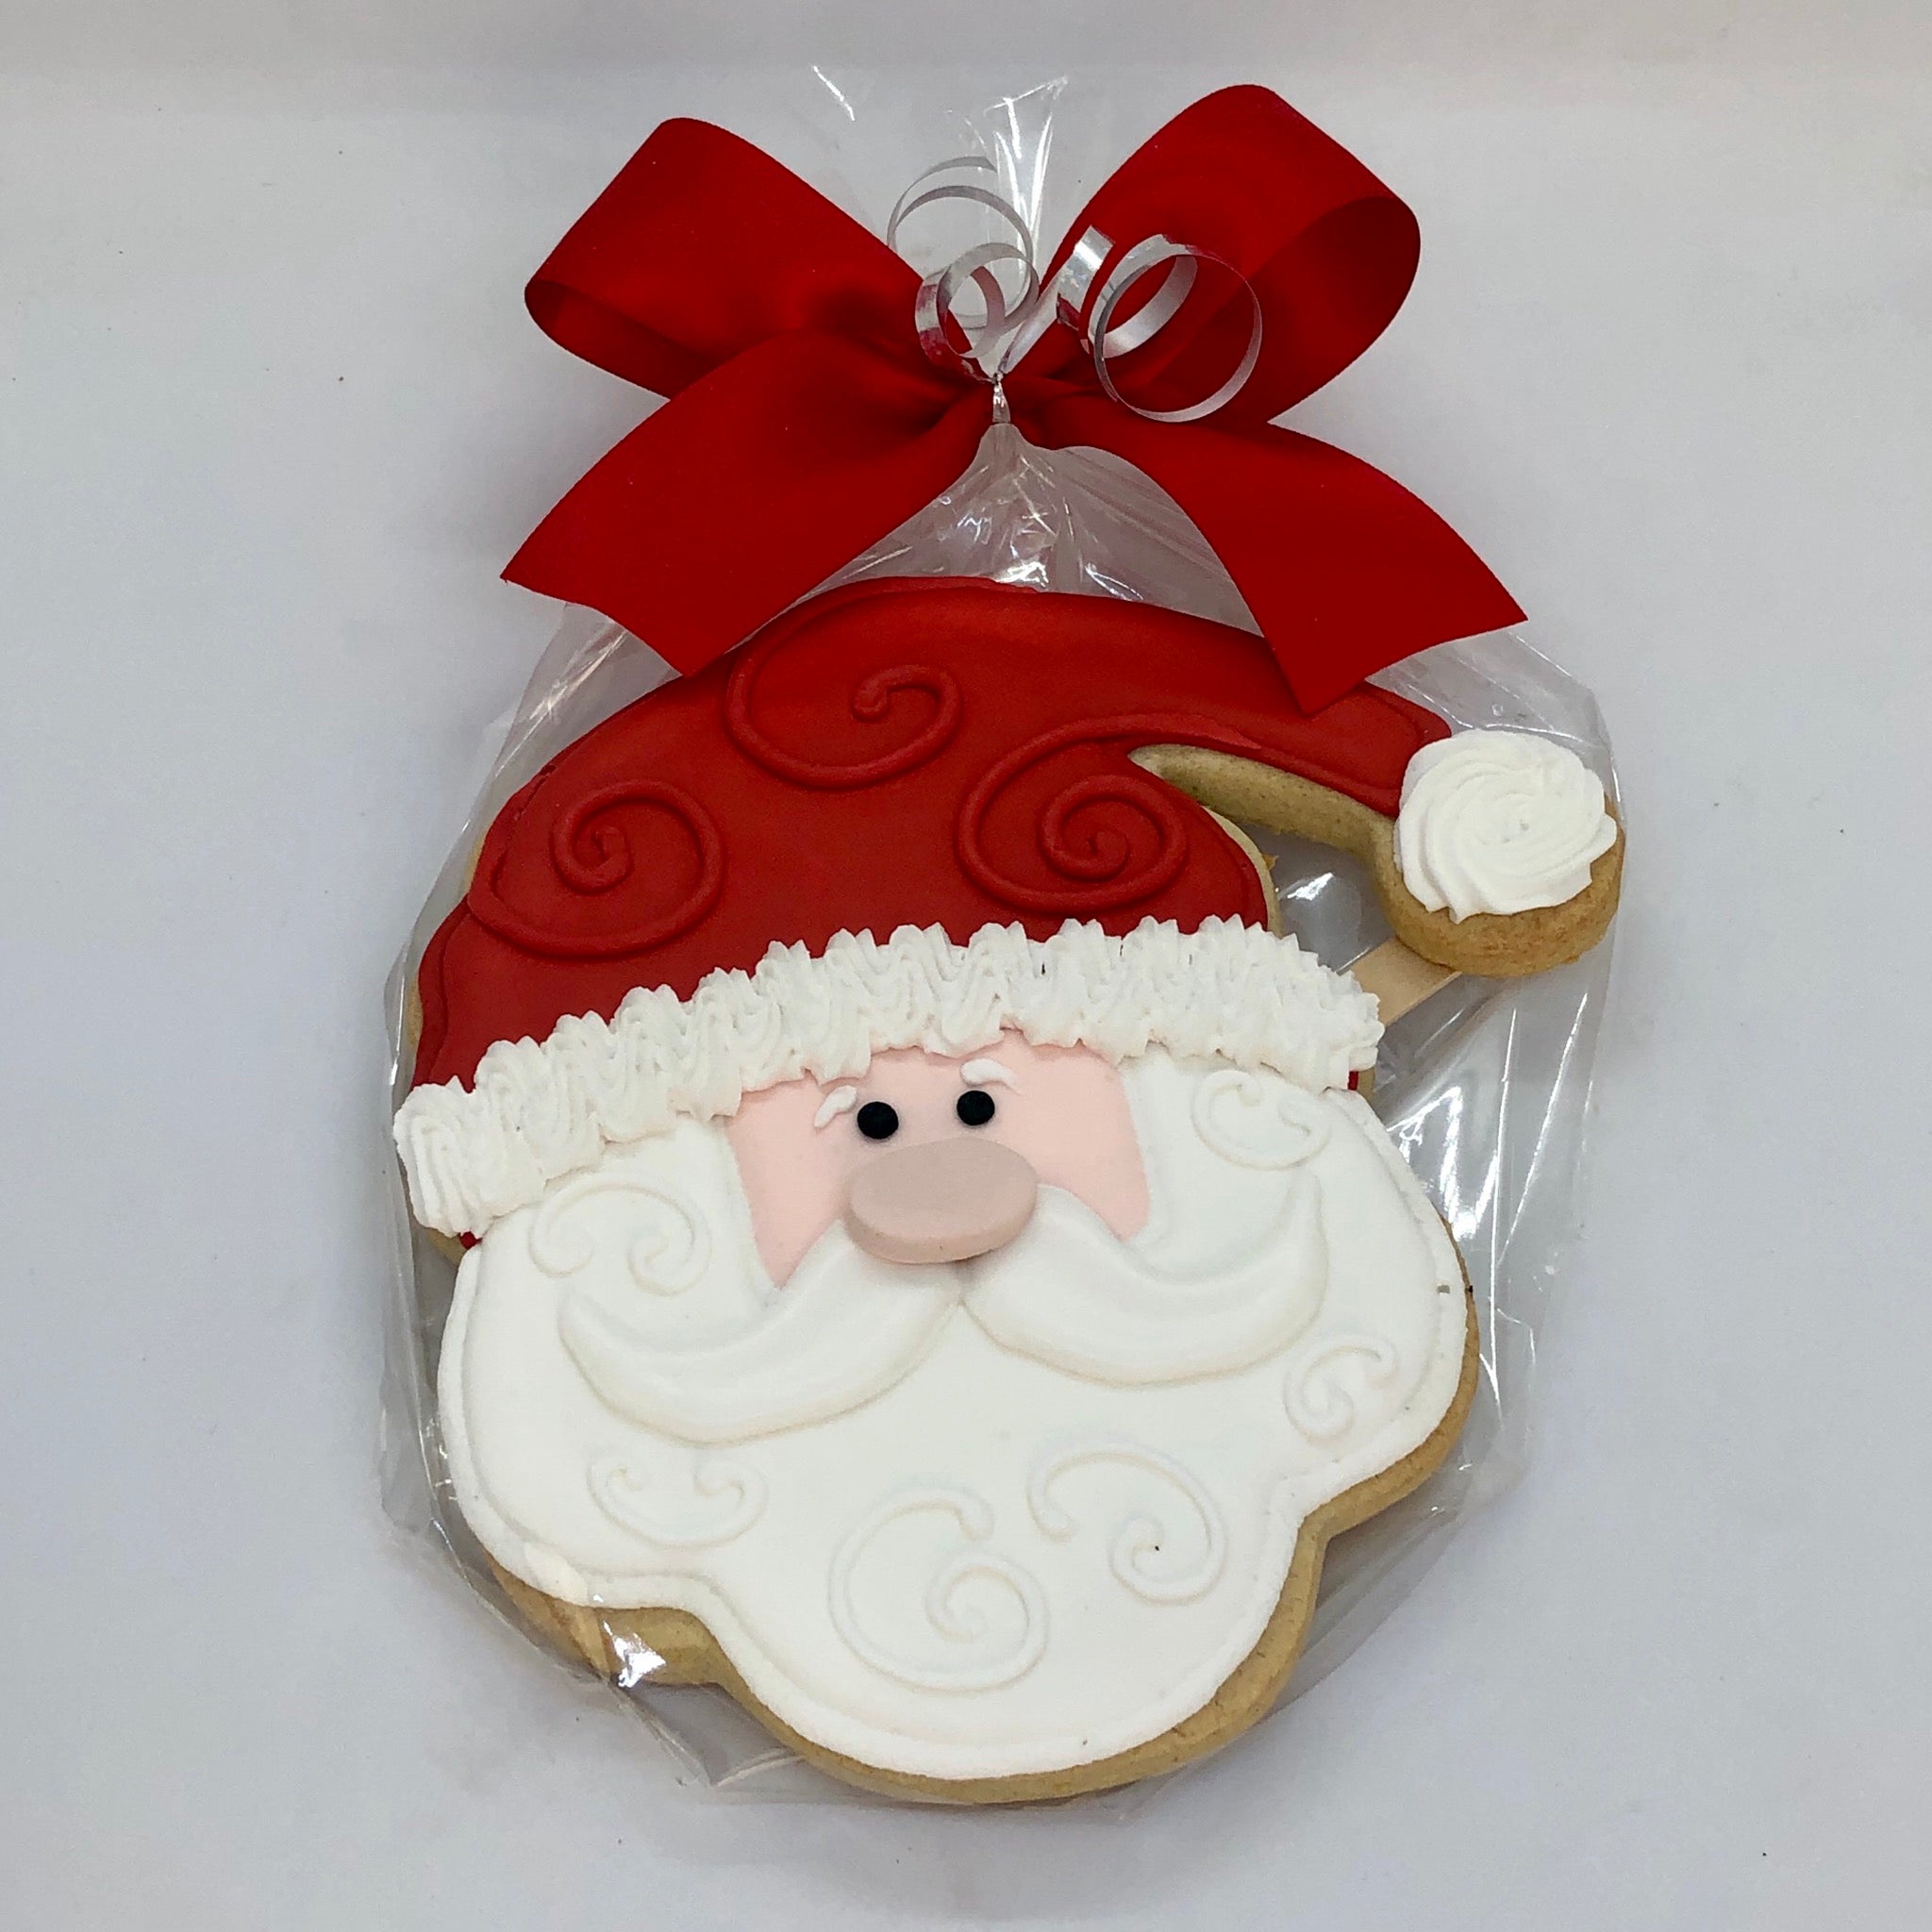 Santa Sugar Cookie wrapped in cellophane with a ribbon